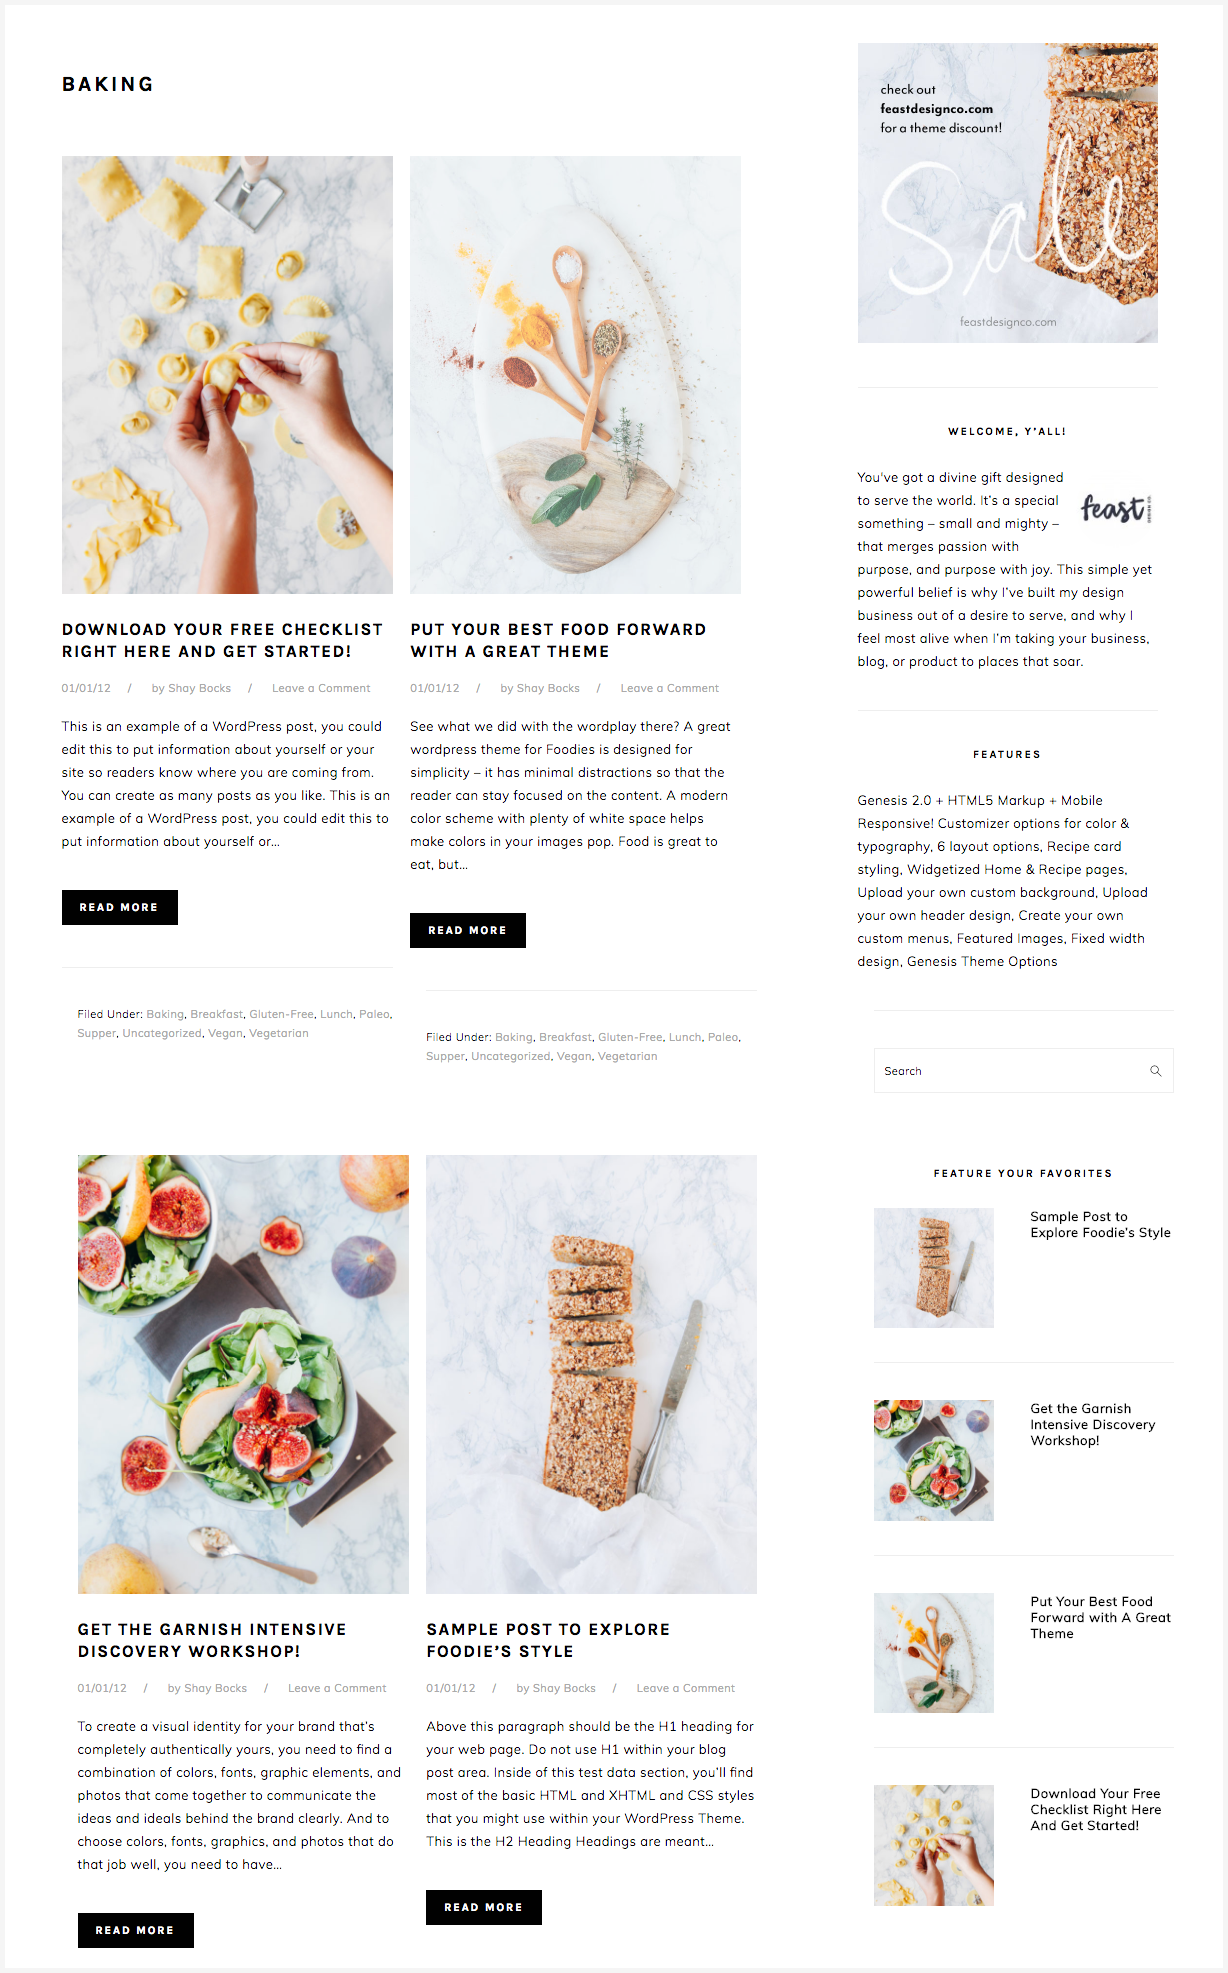 How to Configure the Foodie Pro Theme Content Archives